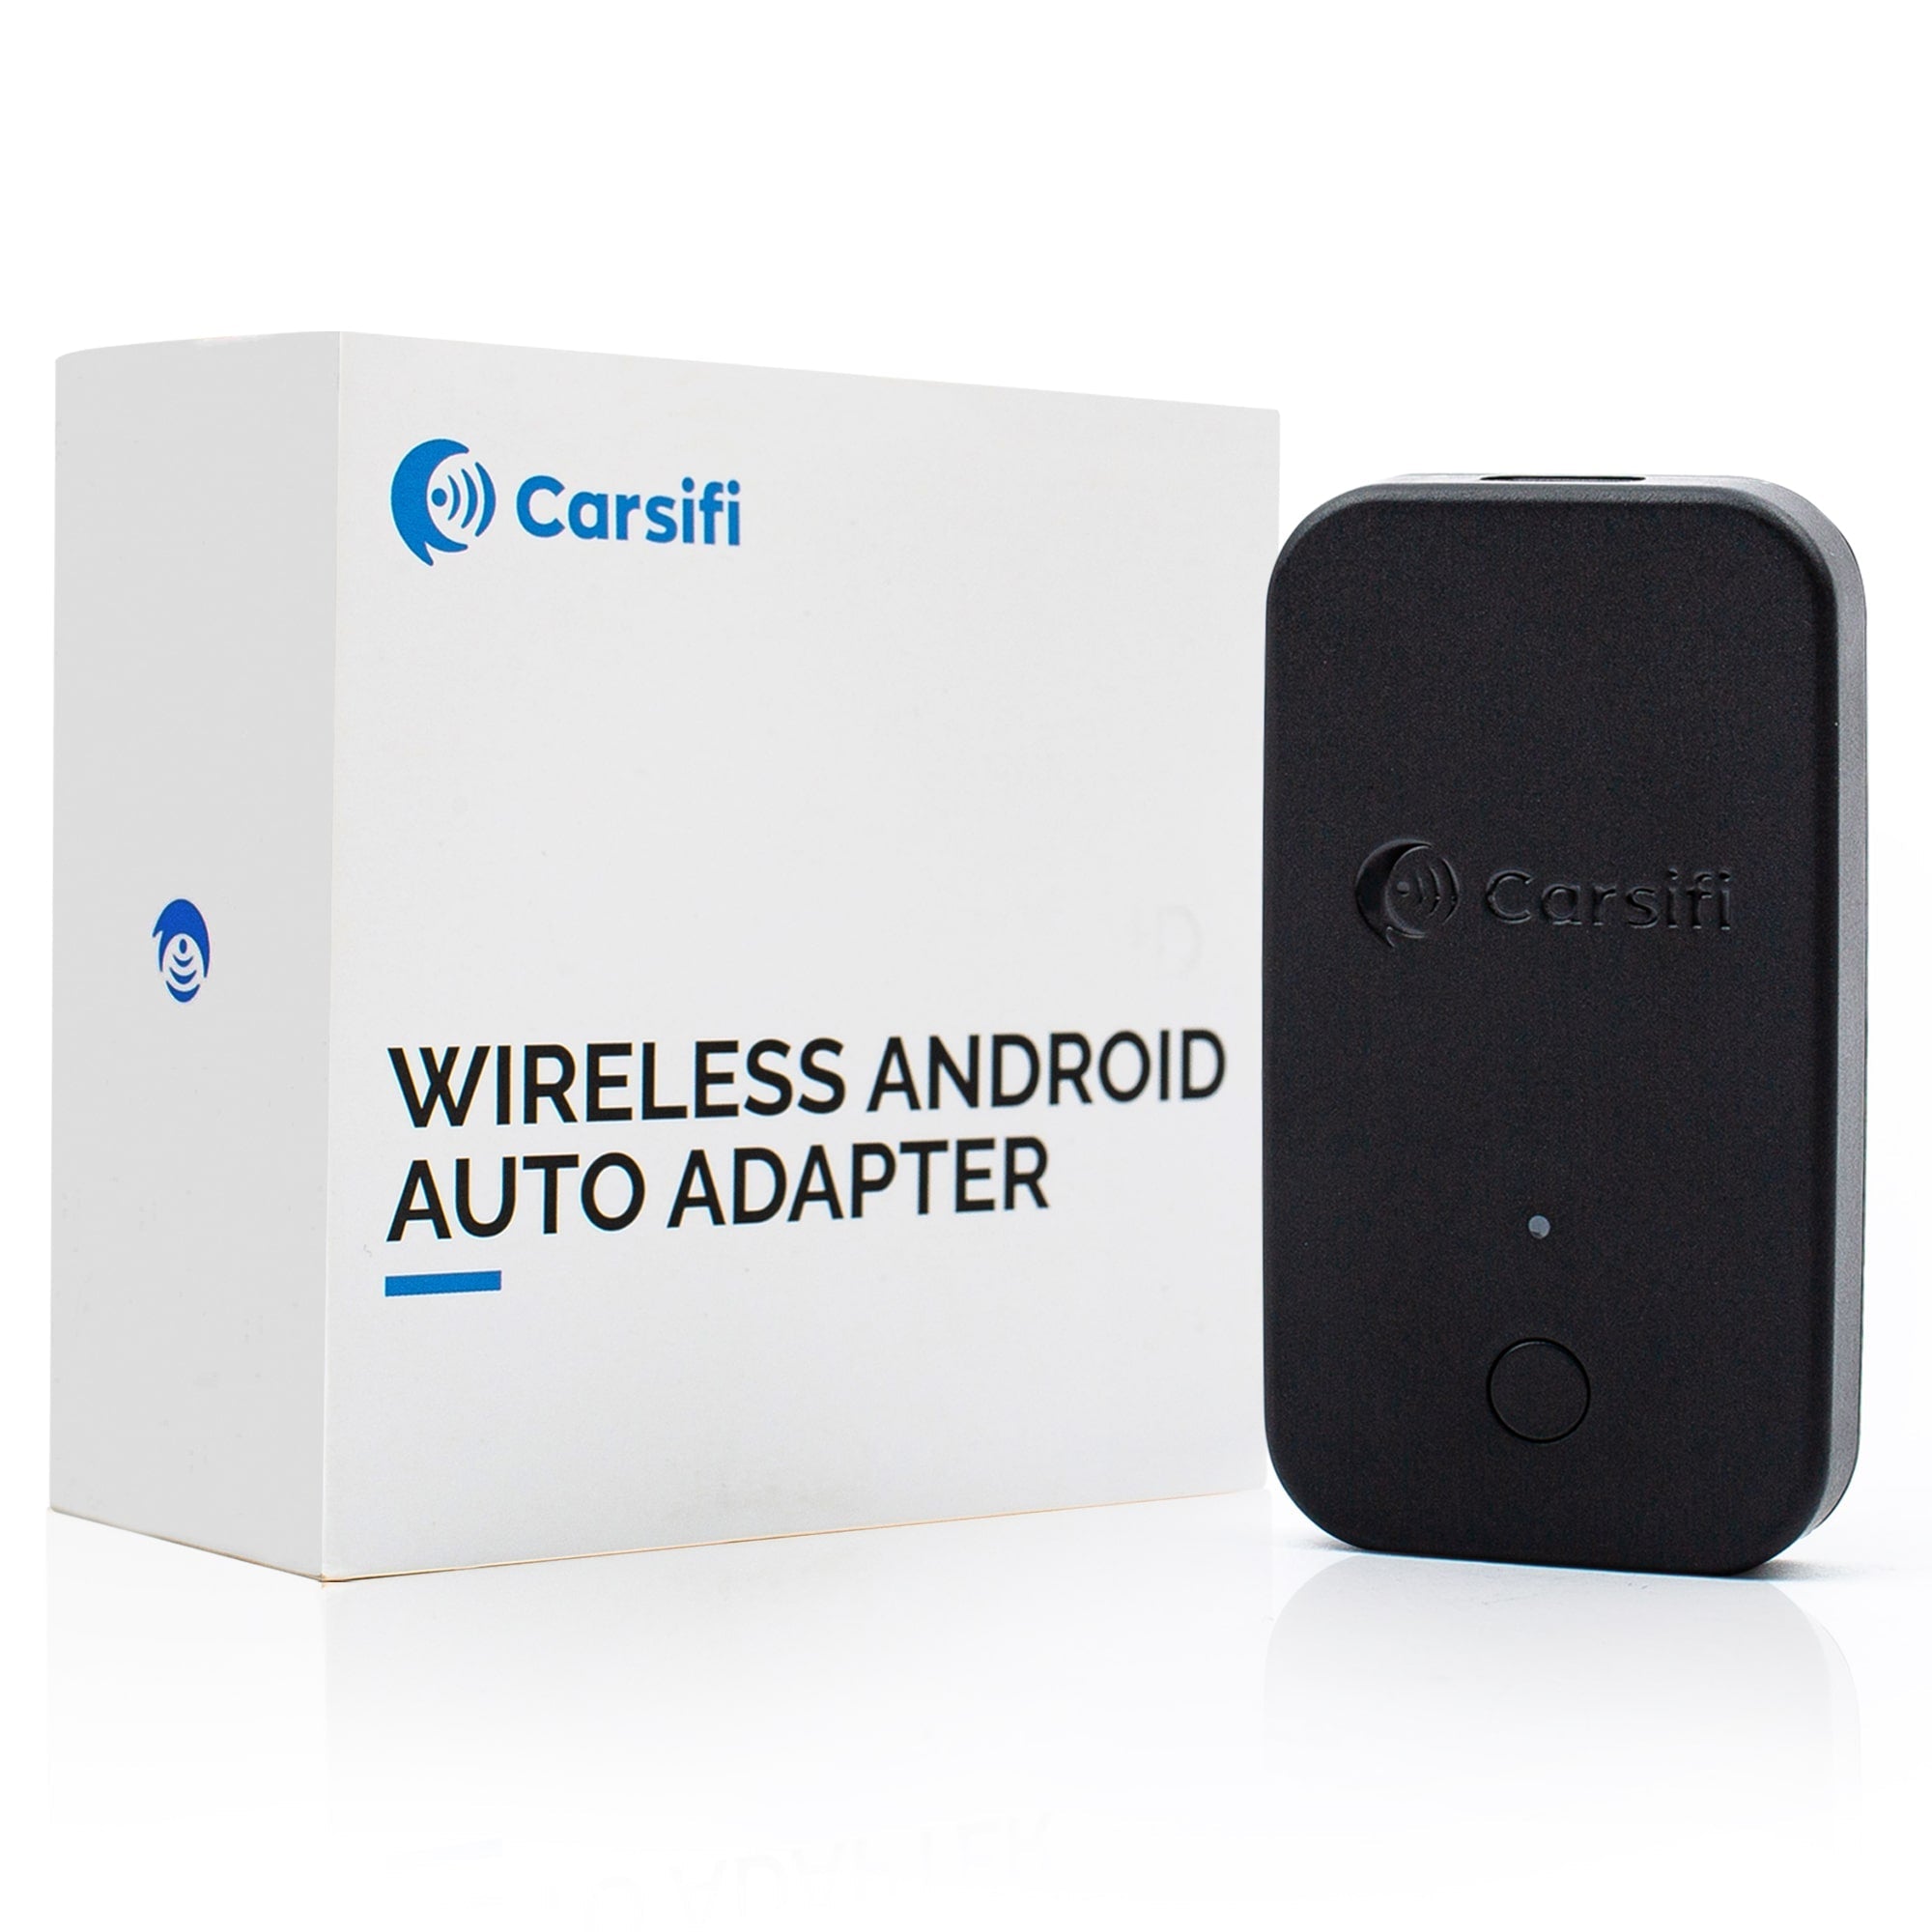 My Carsifi wireless Android Auto adapter showed up today - first